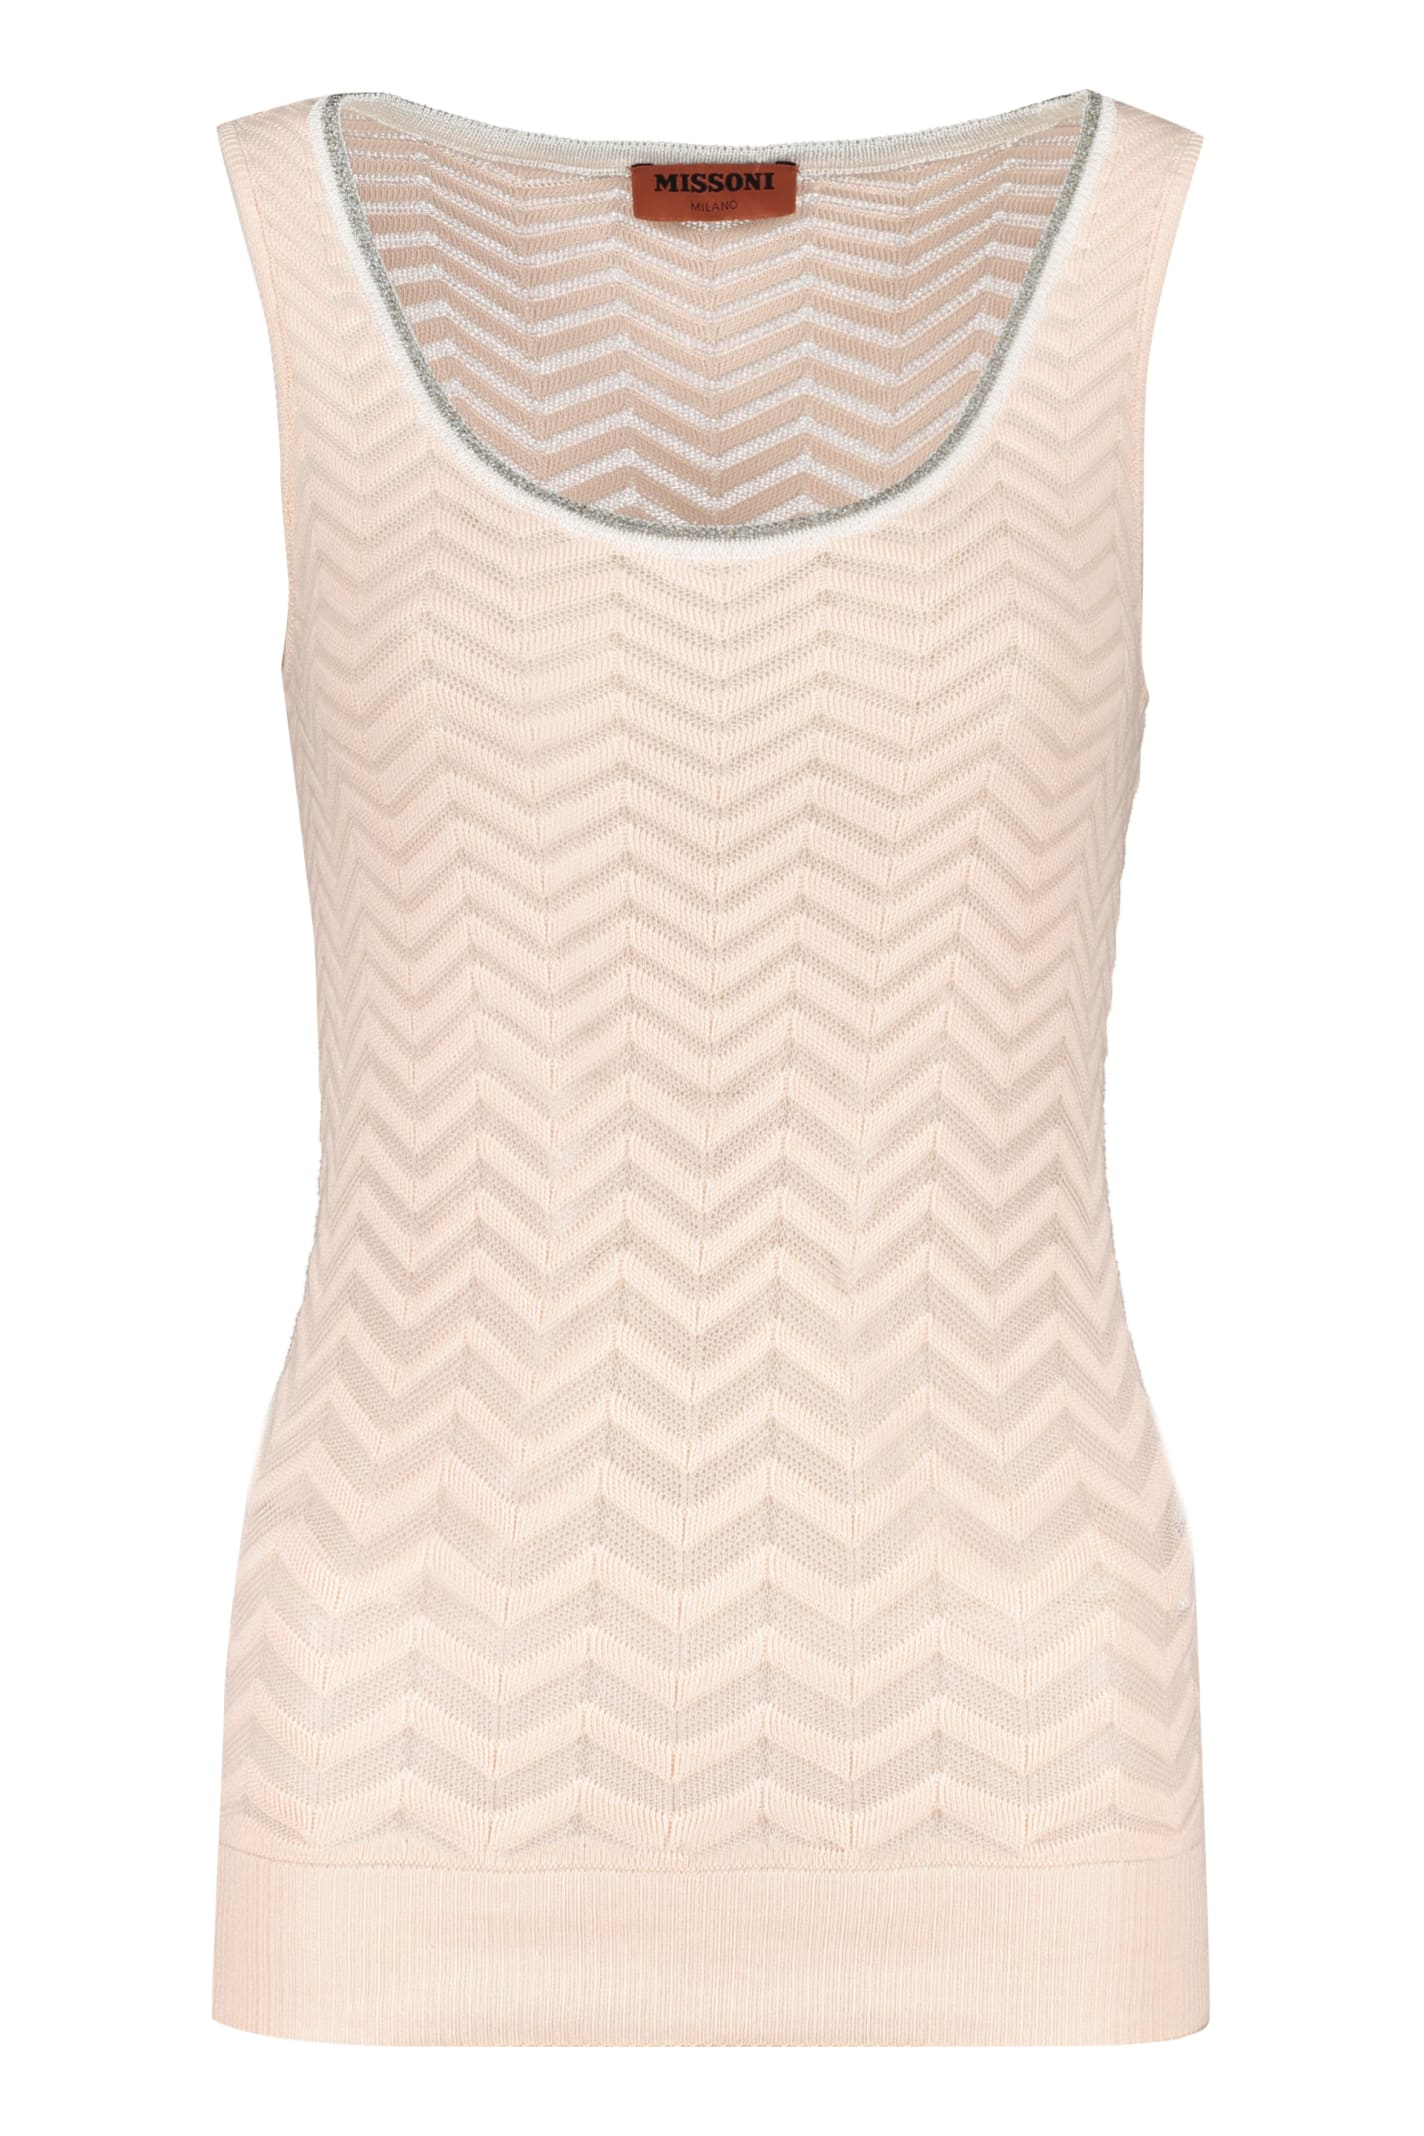 Missoni Cotton Tank Top In Pink